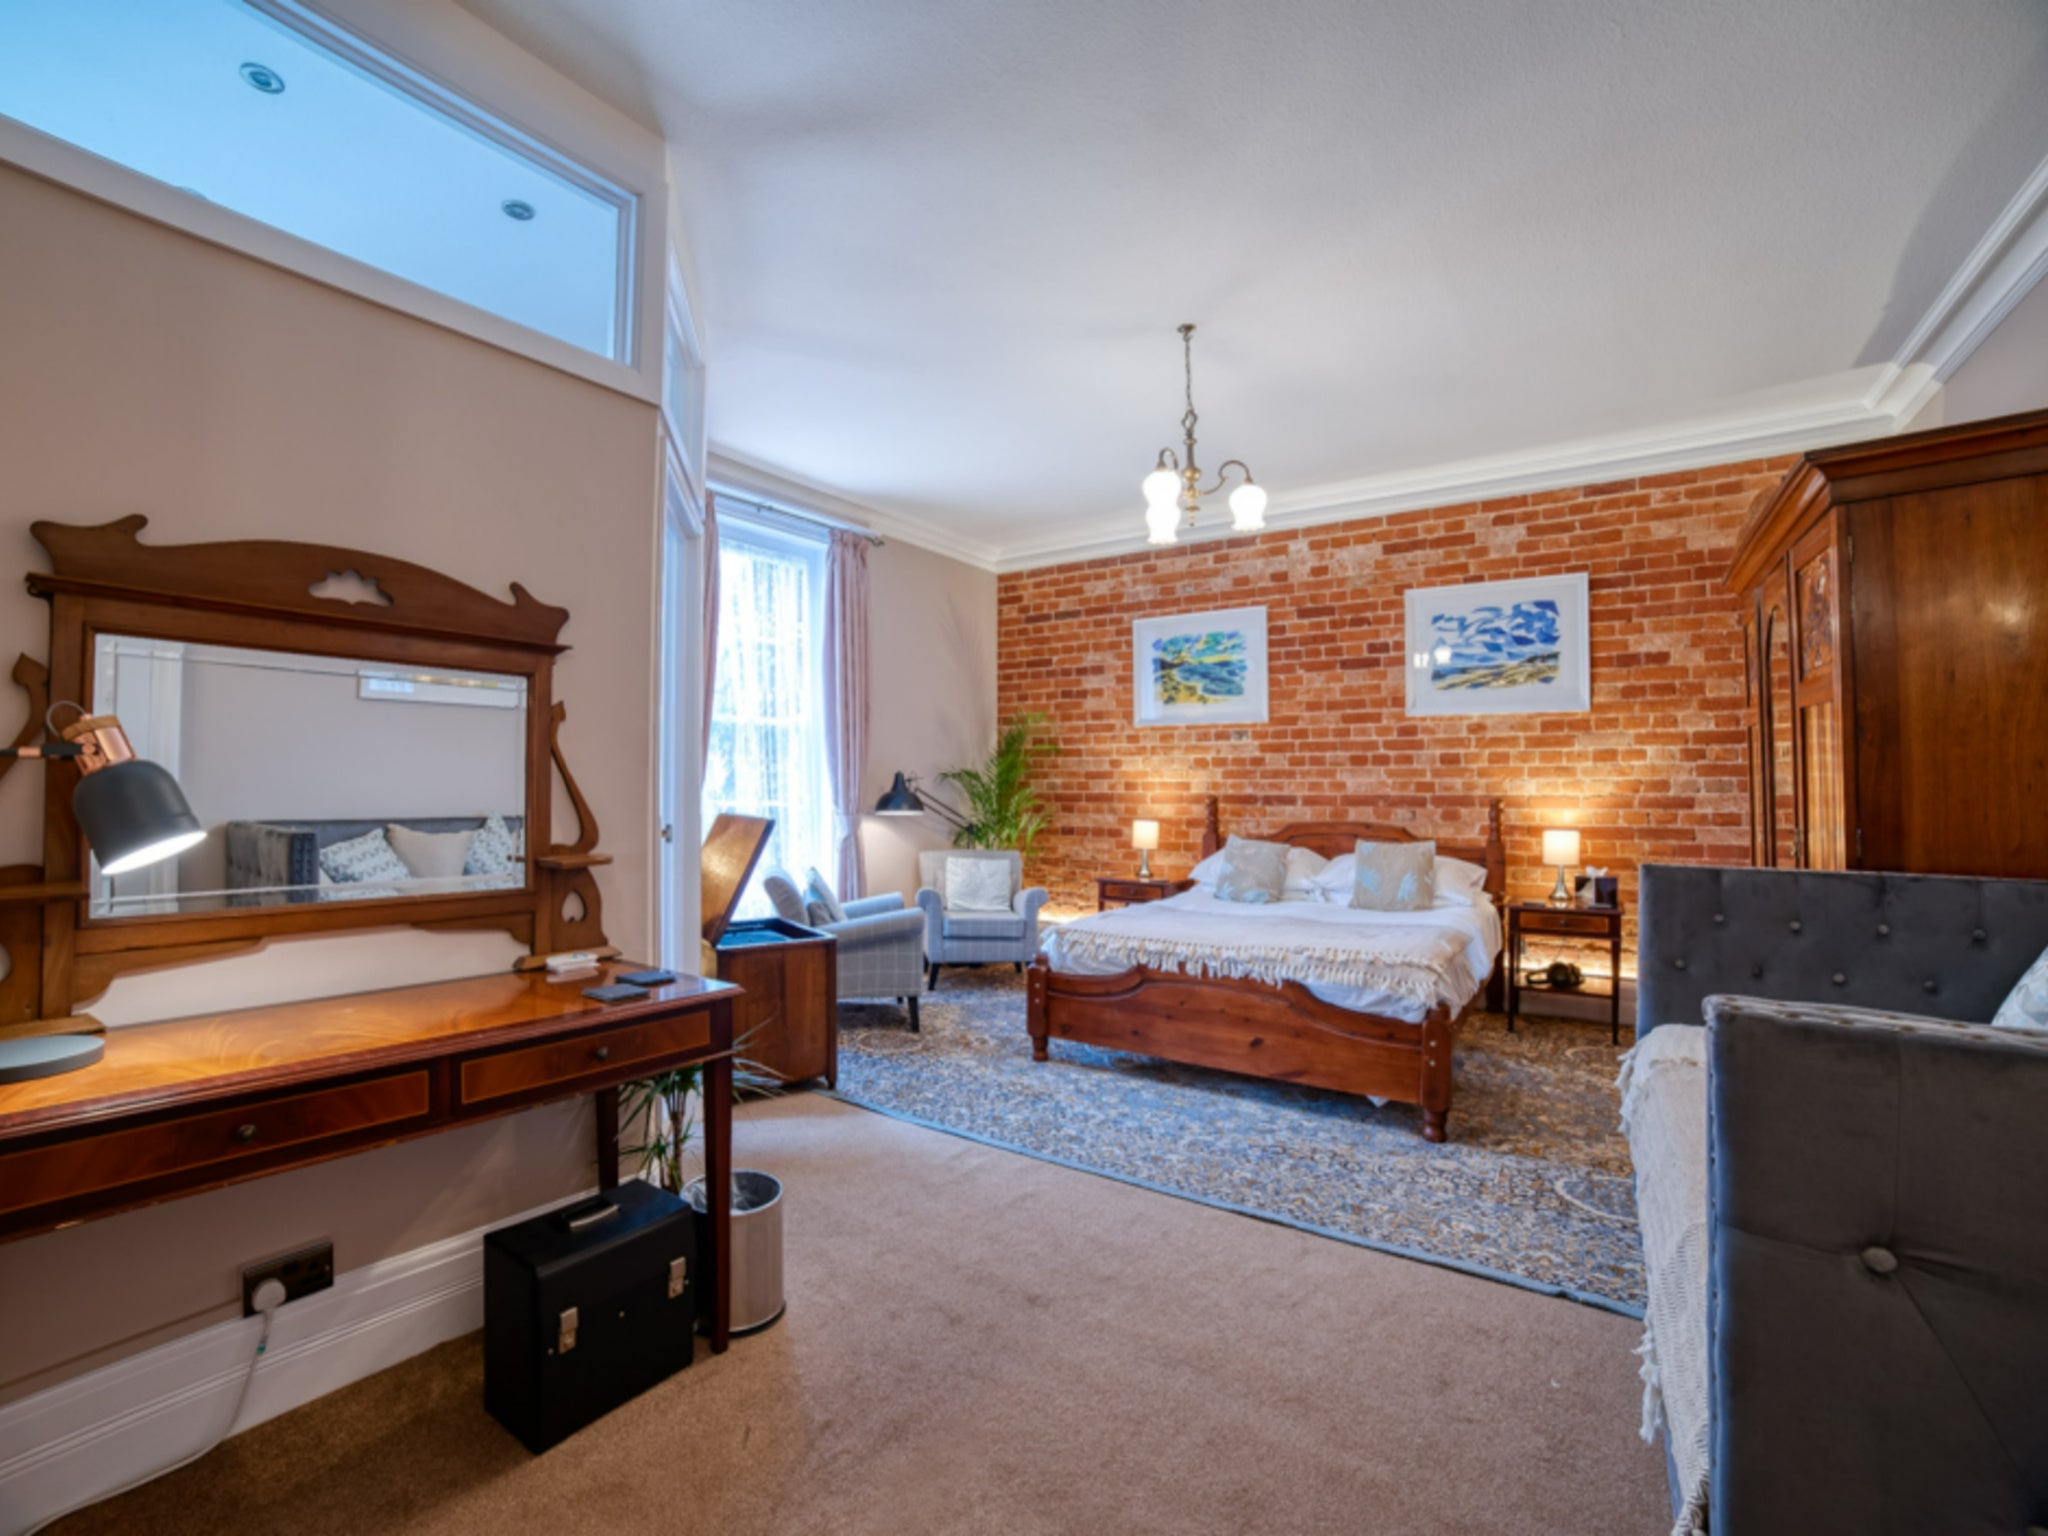 The family-run Grove hotel has large, homely rooms